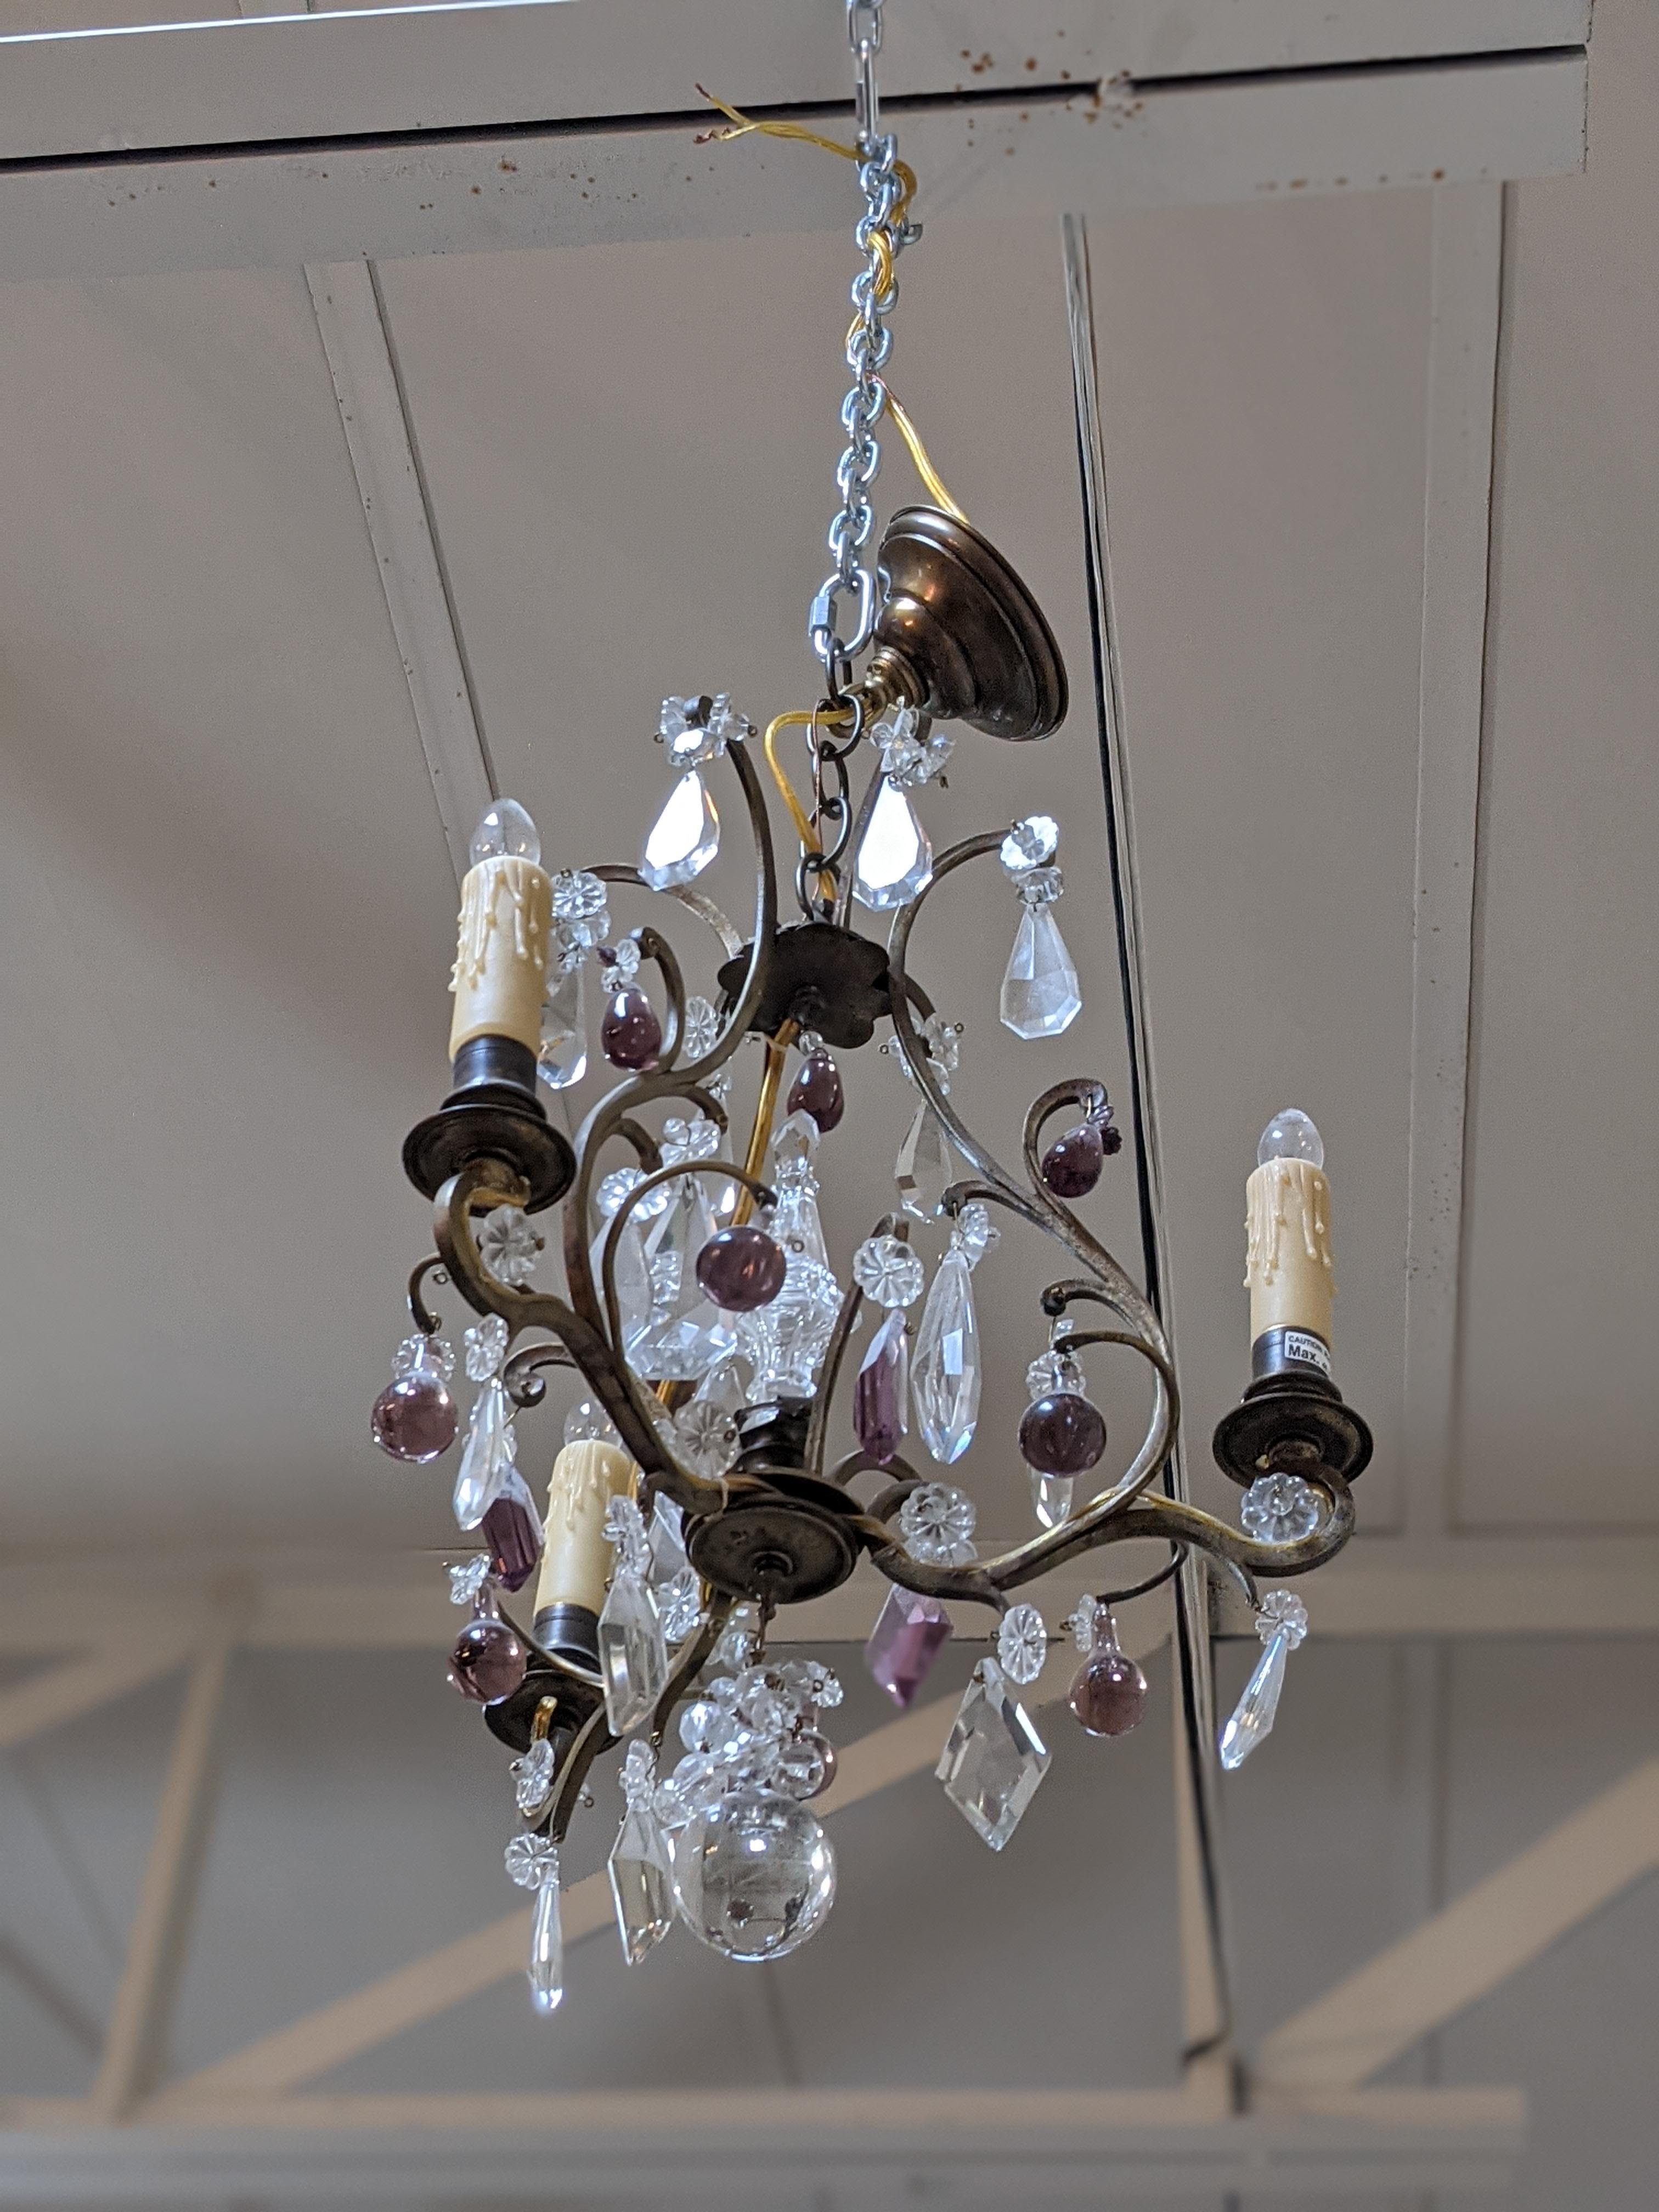 This bronze and crystal chandelier with 3 lights origins from France.

19th century period.